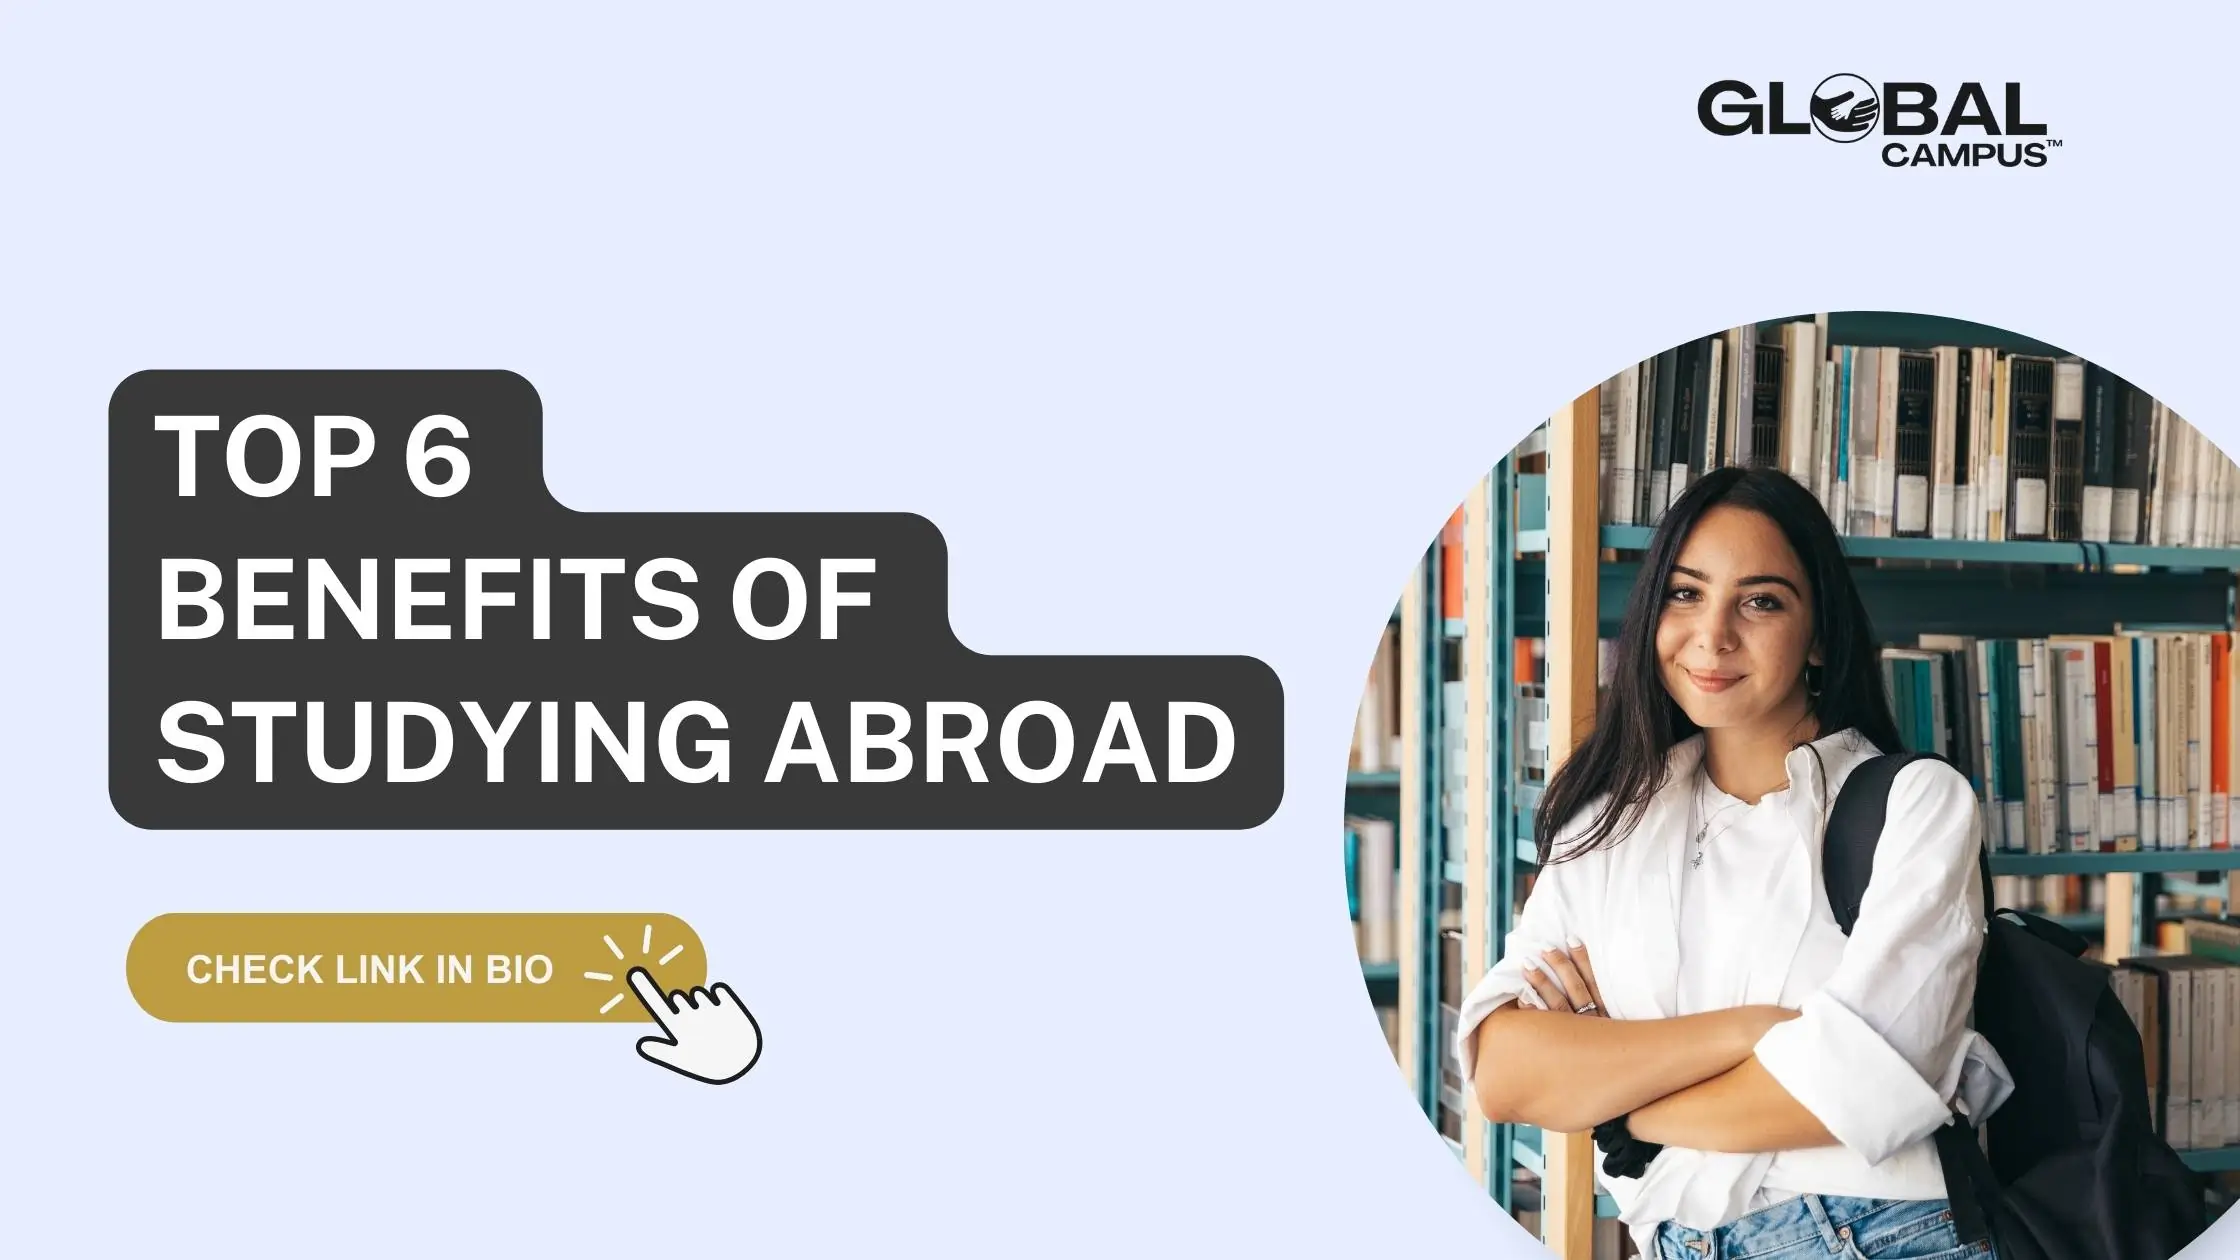 A girl student with a backpack poses for the camera,, highlighting the Top 6 Benefits of Studying Abroad.